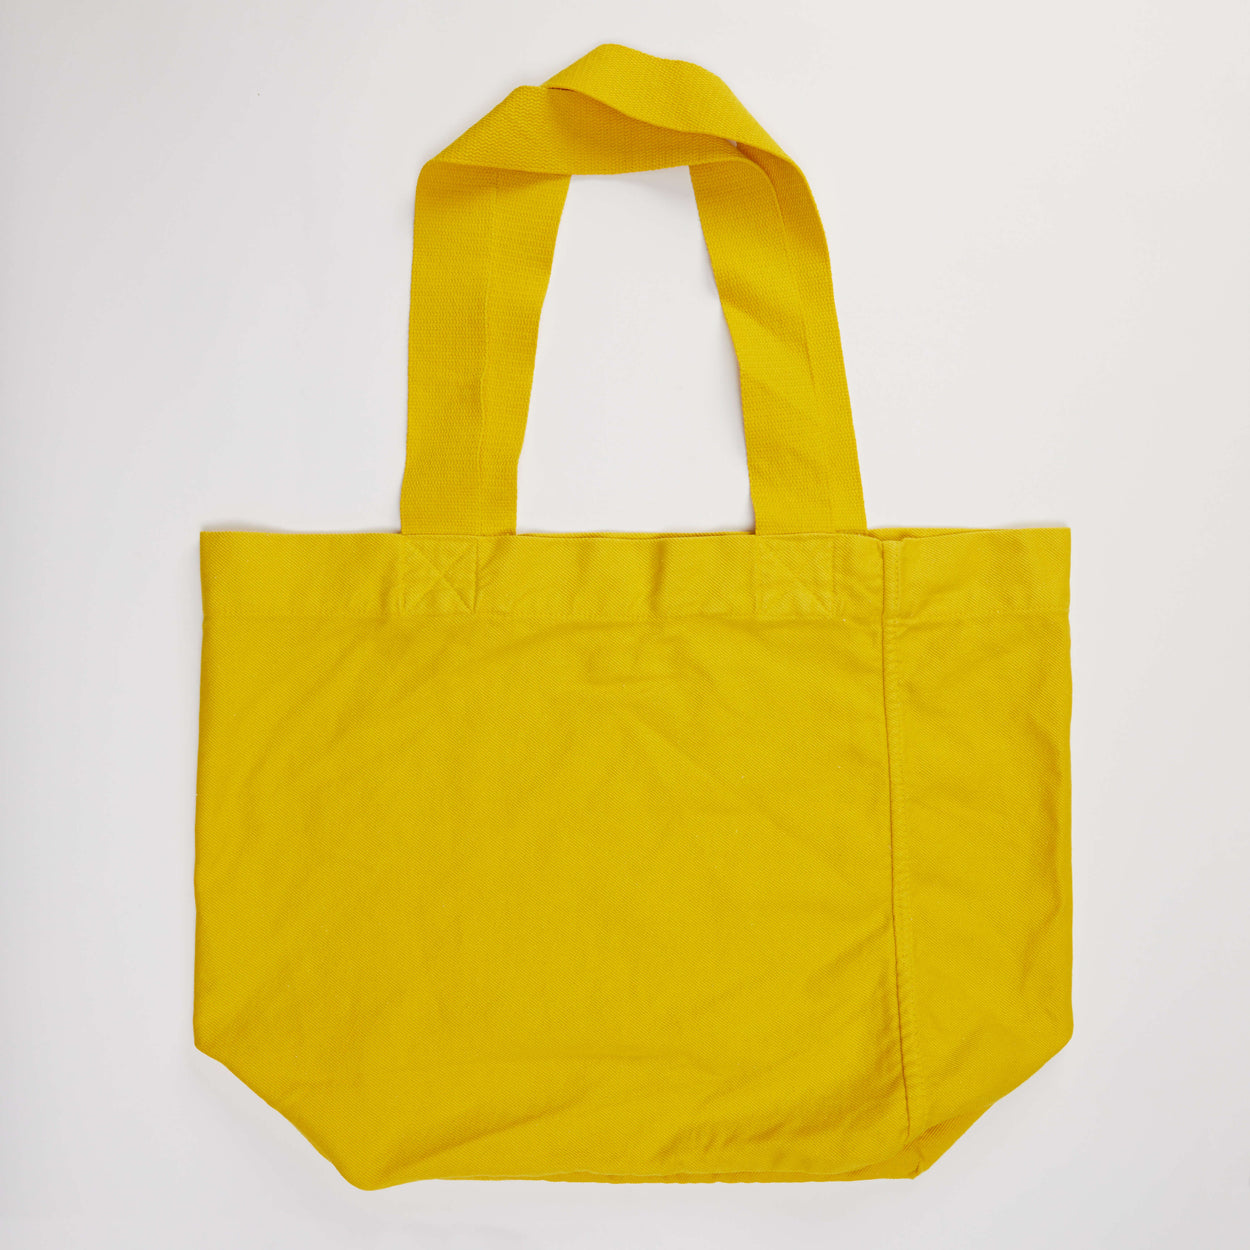 The Big Big Yellow Puzzle Bag from Le Puzz